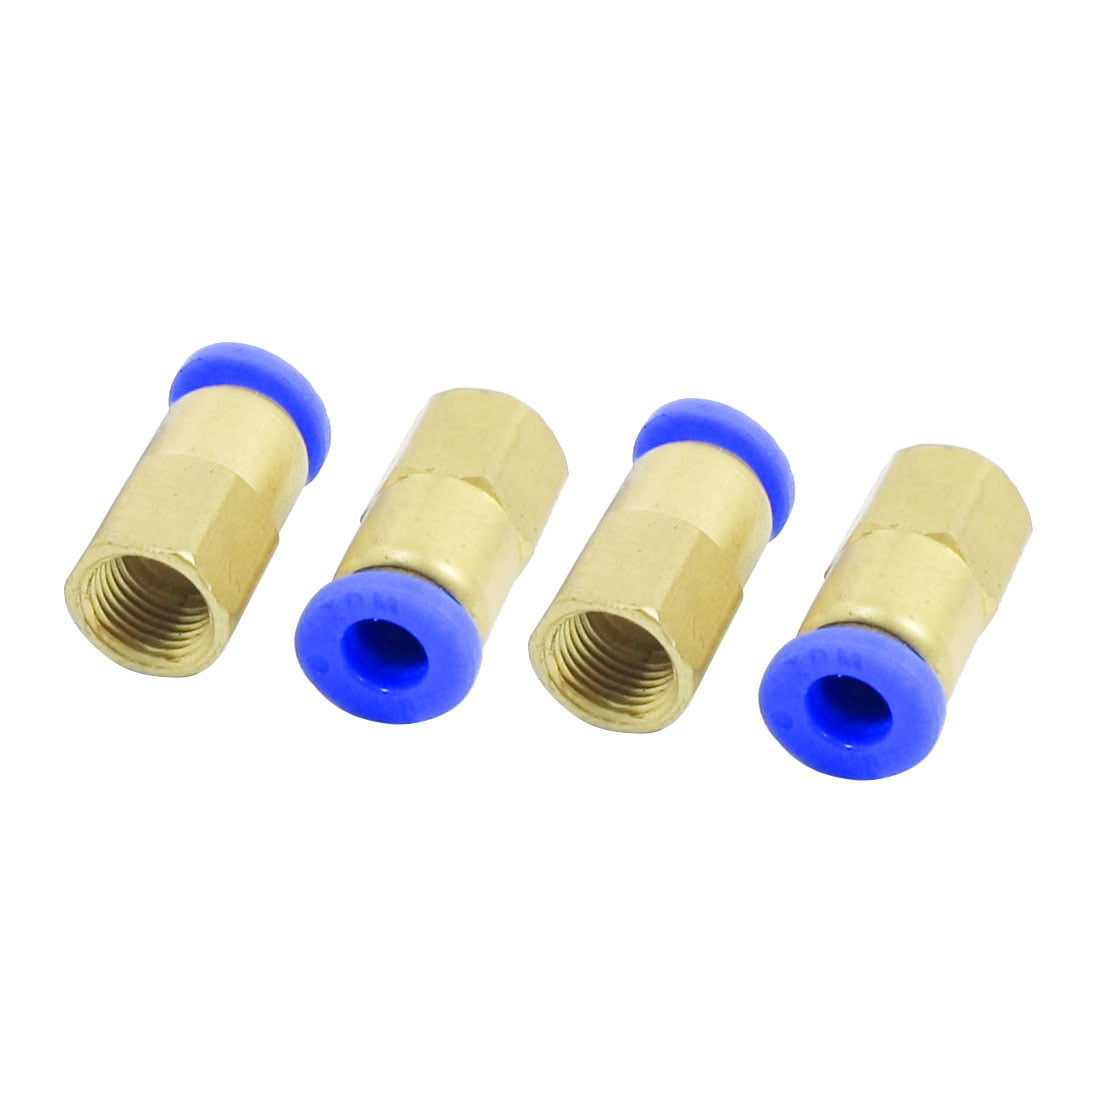 9mm Dia Male Thread Industry Pipe Tube Quick Connecting Fittings 5pcs 